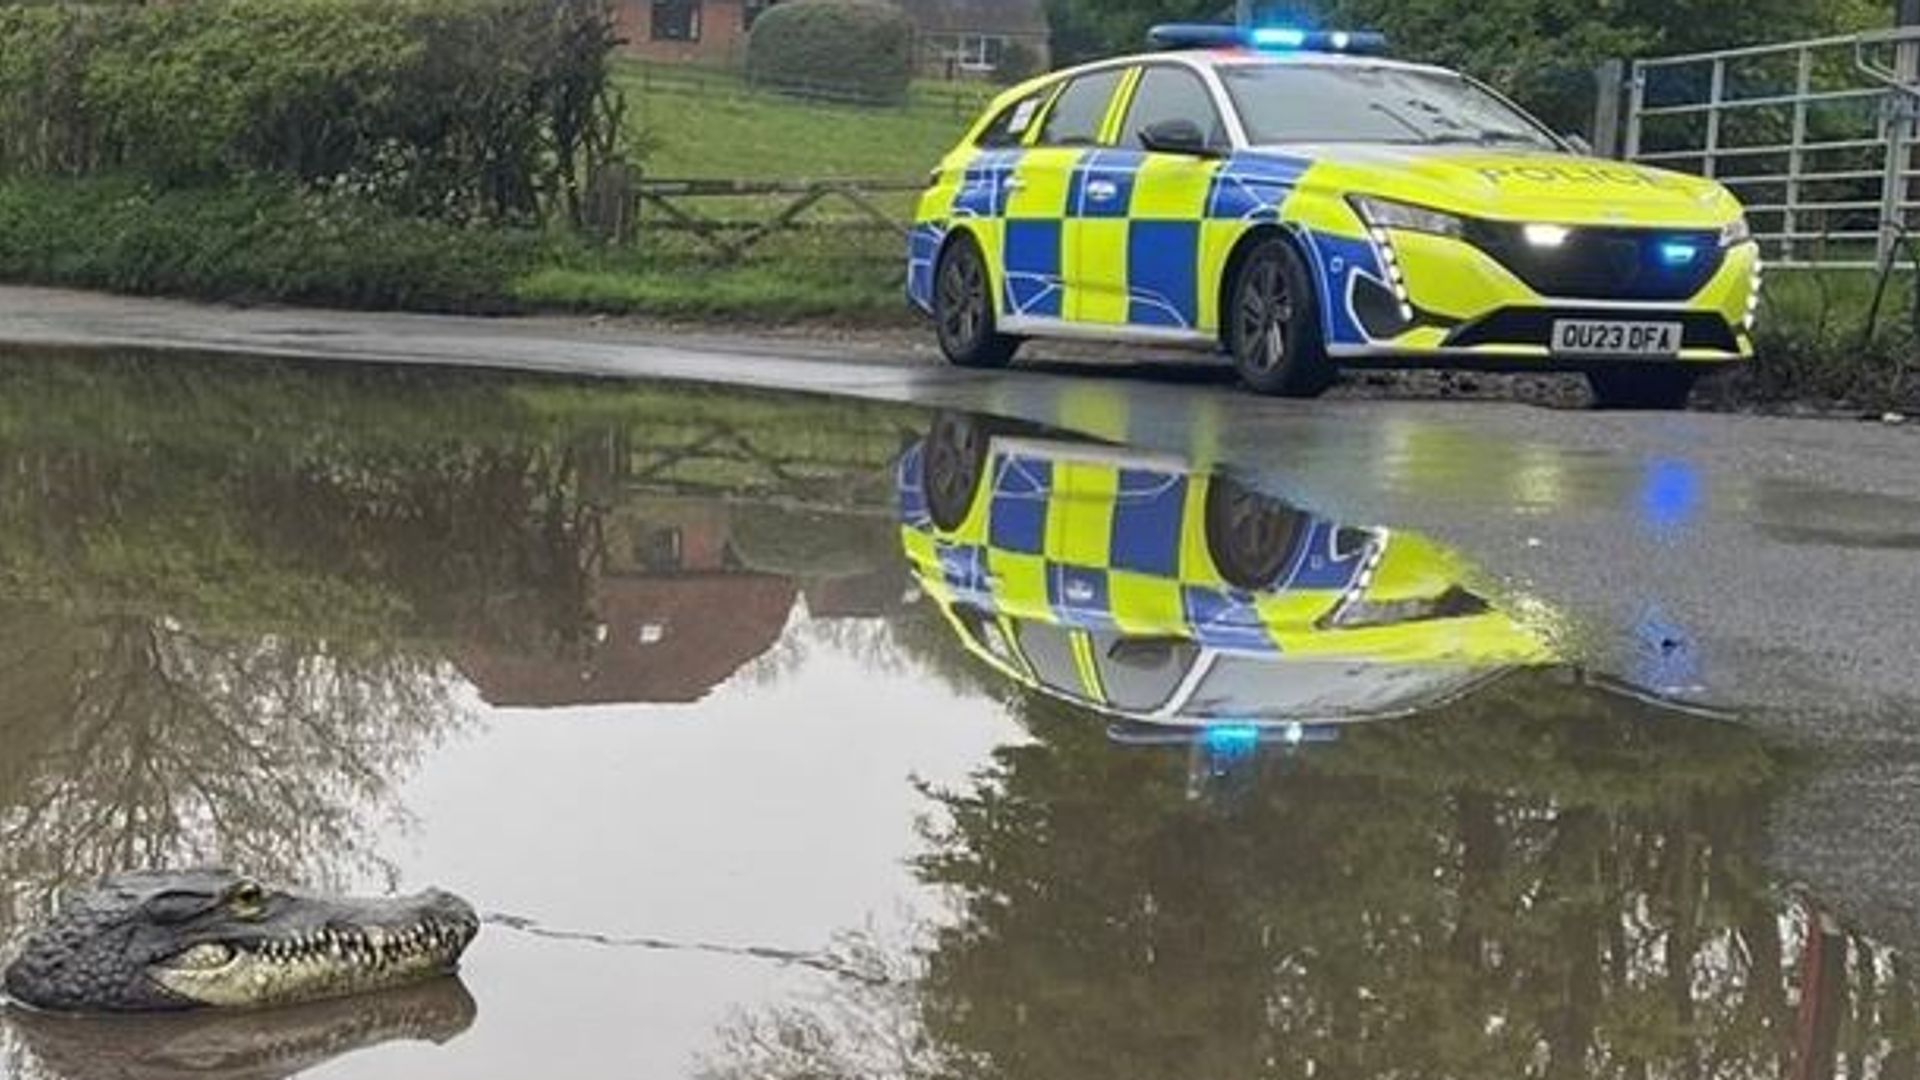 Police called to reports of 'crocodile' in flood water